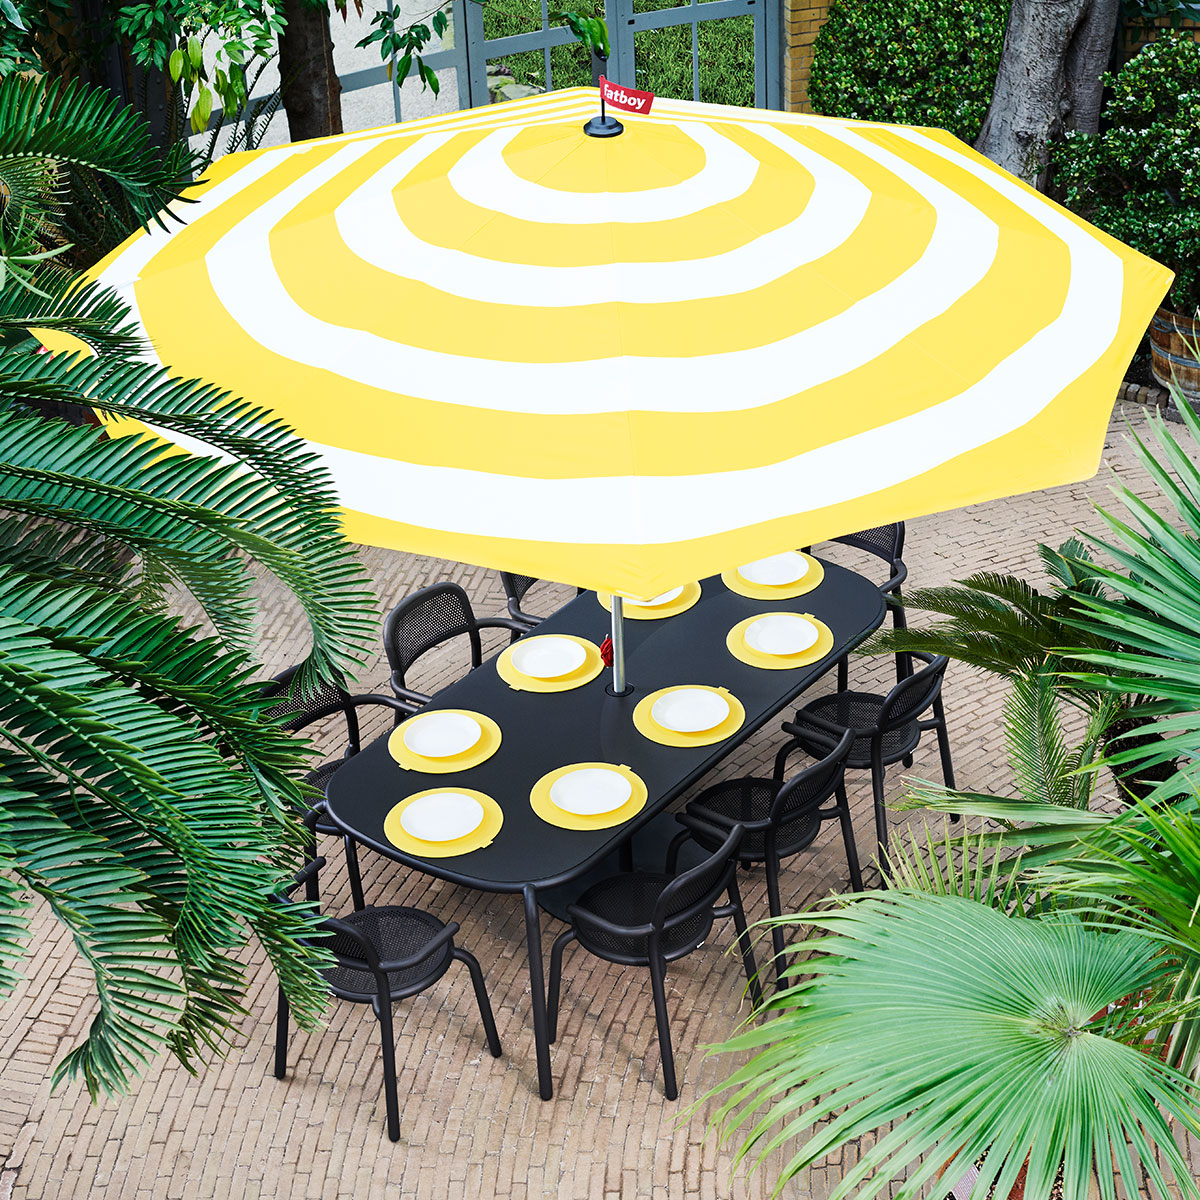 Fatboy Stripesol Parasol and Toni Table & Chairs